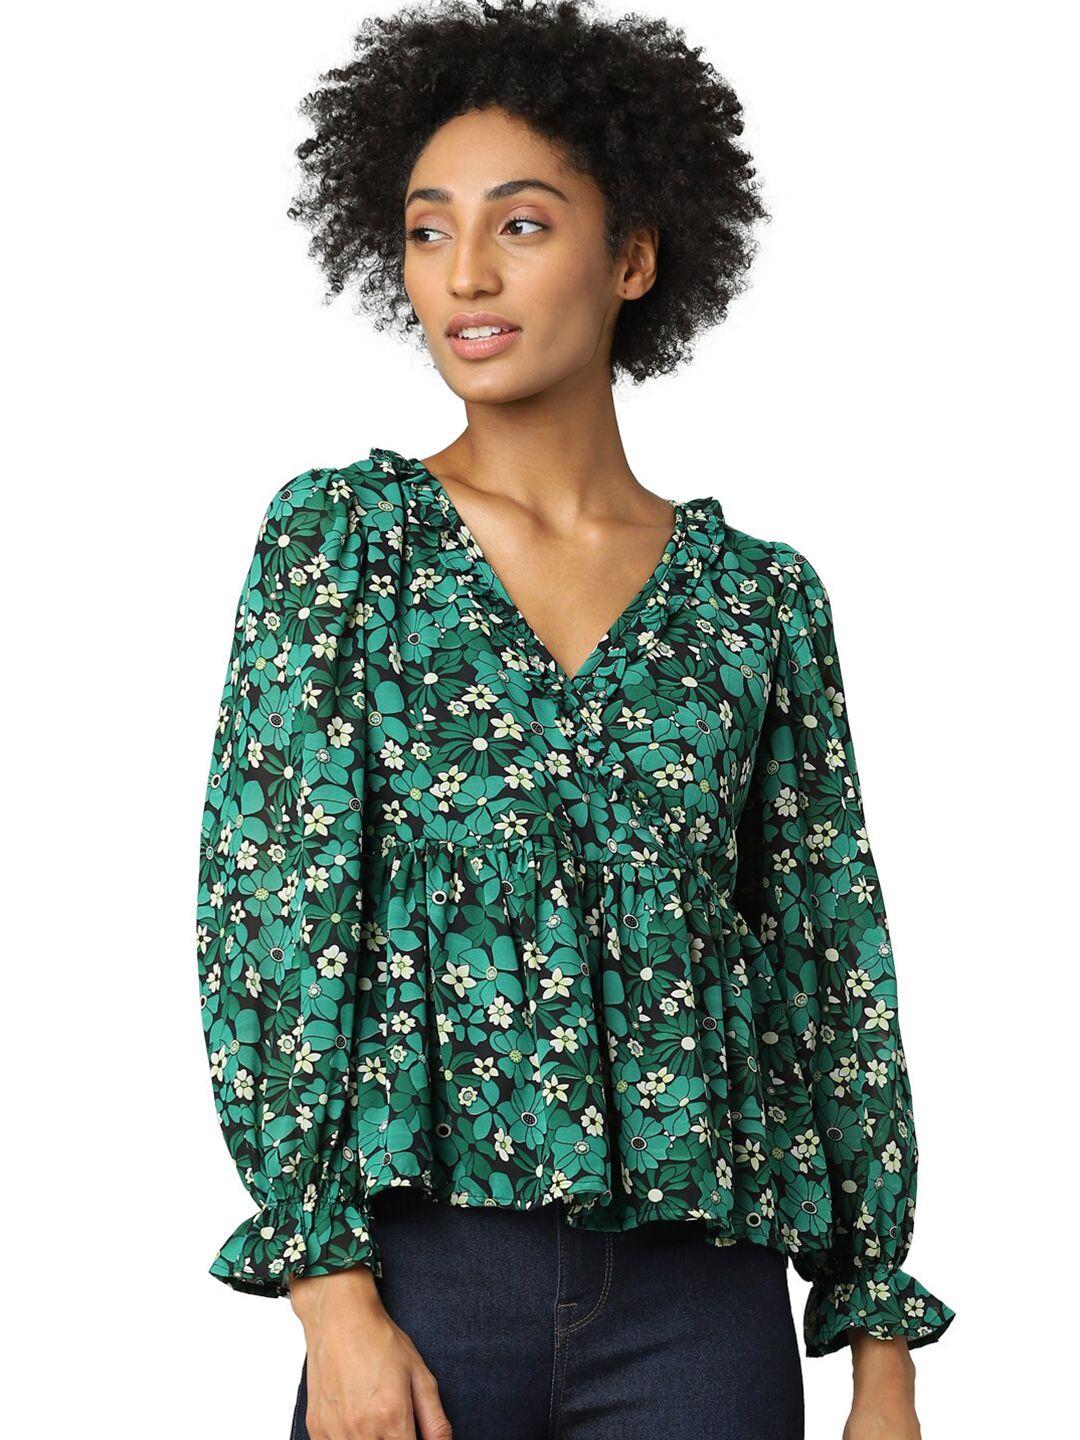 ONLY Green Floral Print Peplum Top Price in India